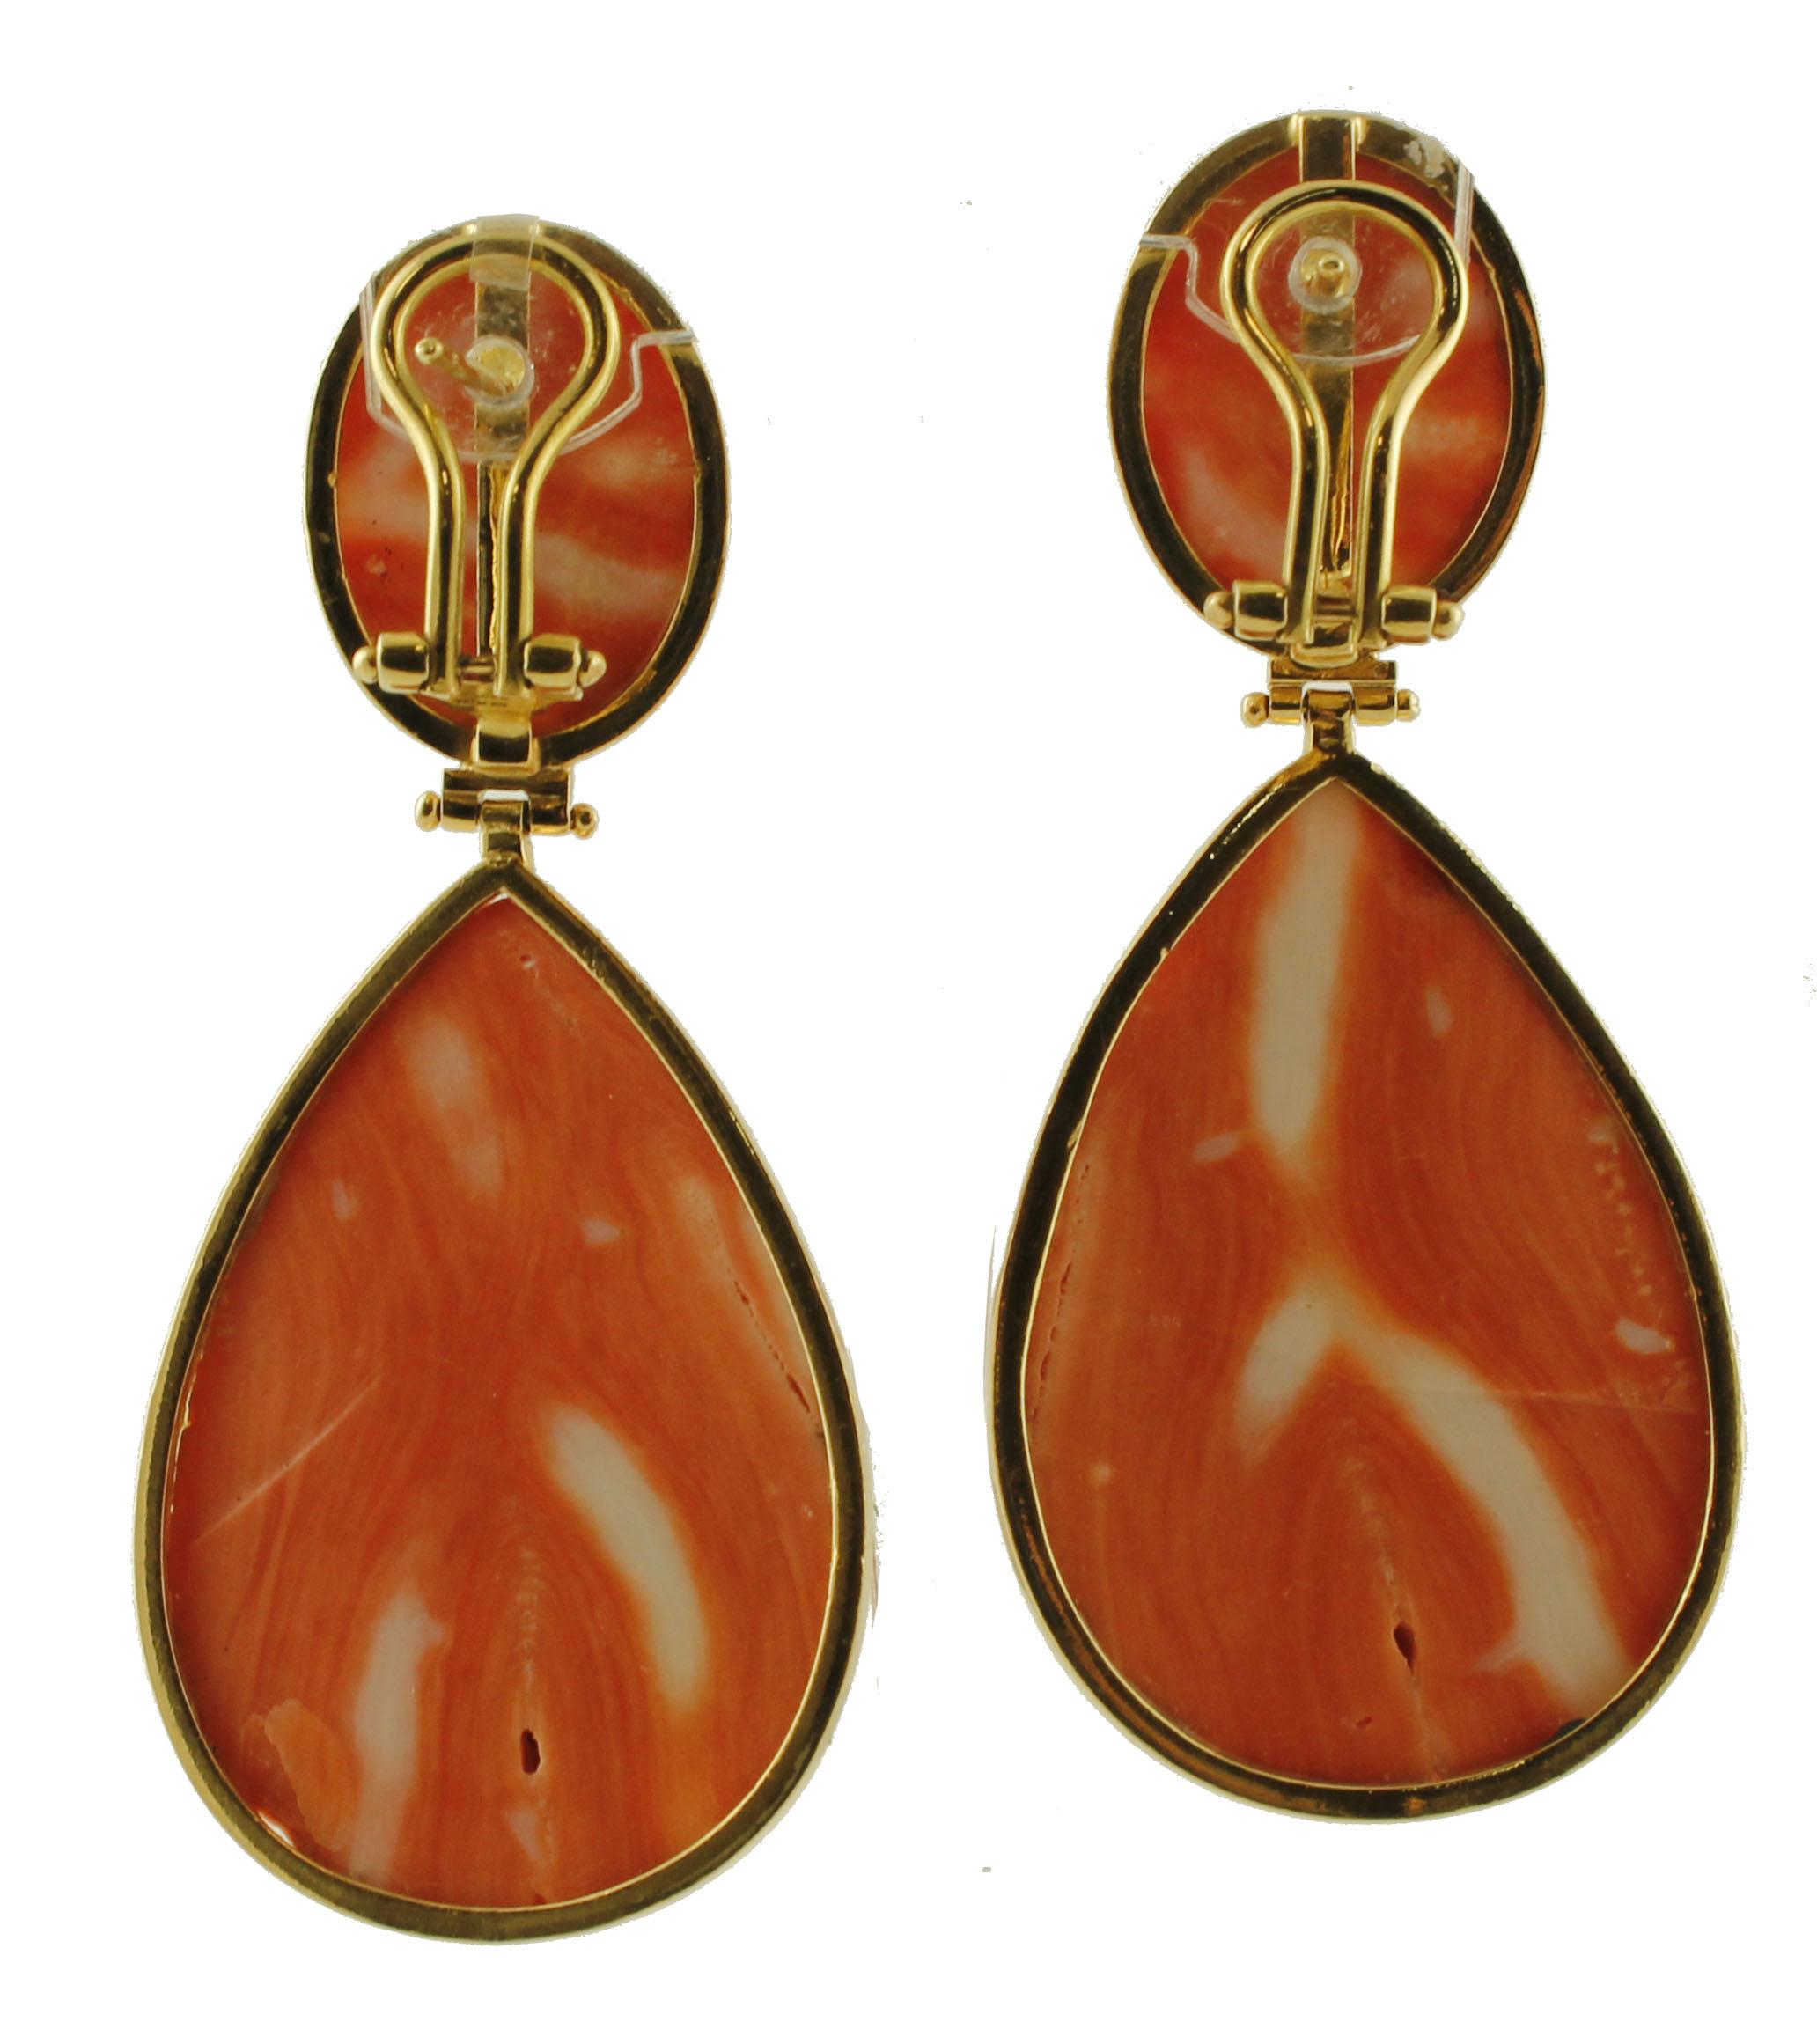 Marvelous pair of dangle earrings in 18k yellow gold structure, realized with 34.1g of elatius coral finely carved by Italian master goldsmiths. 
These earrings are totally handmade following the ancient neapolitan tradition of coral